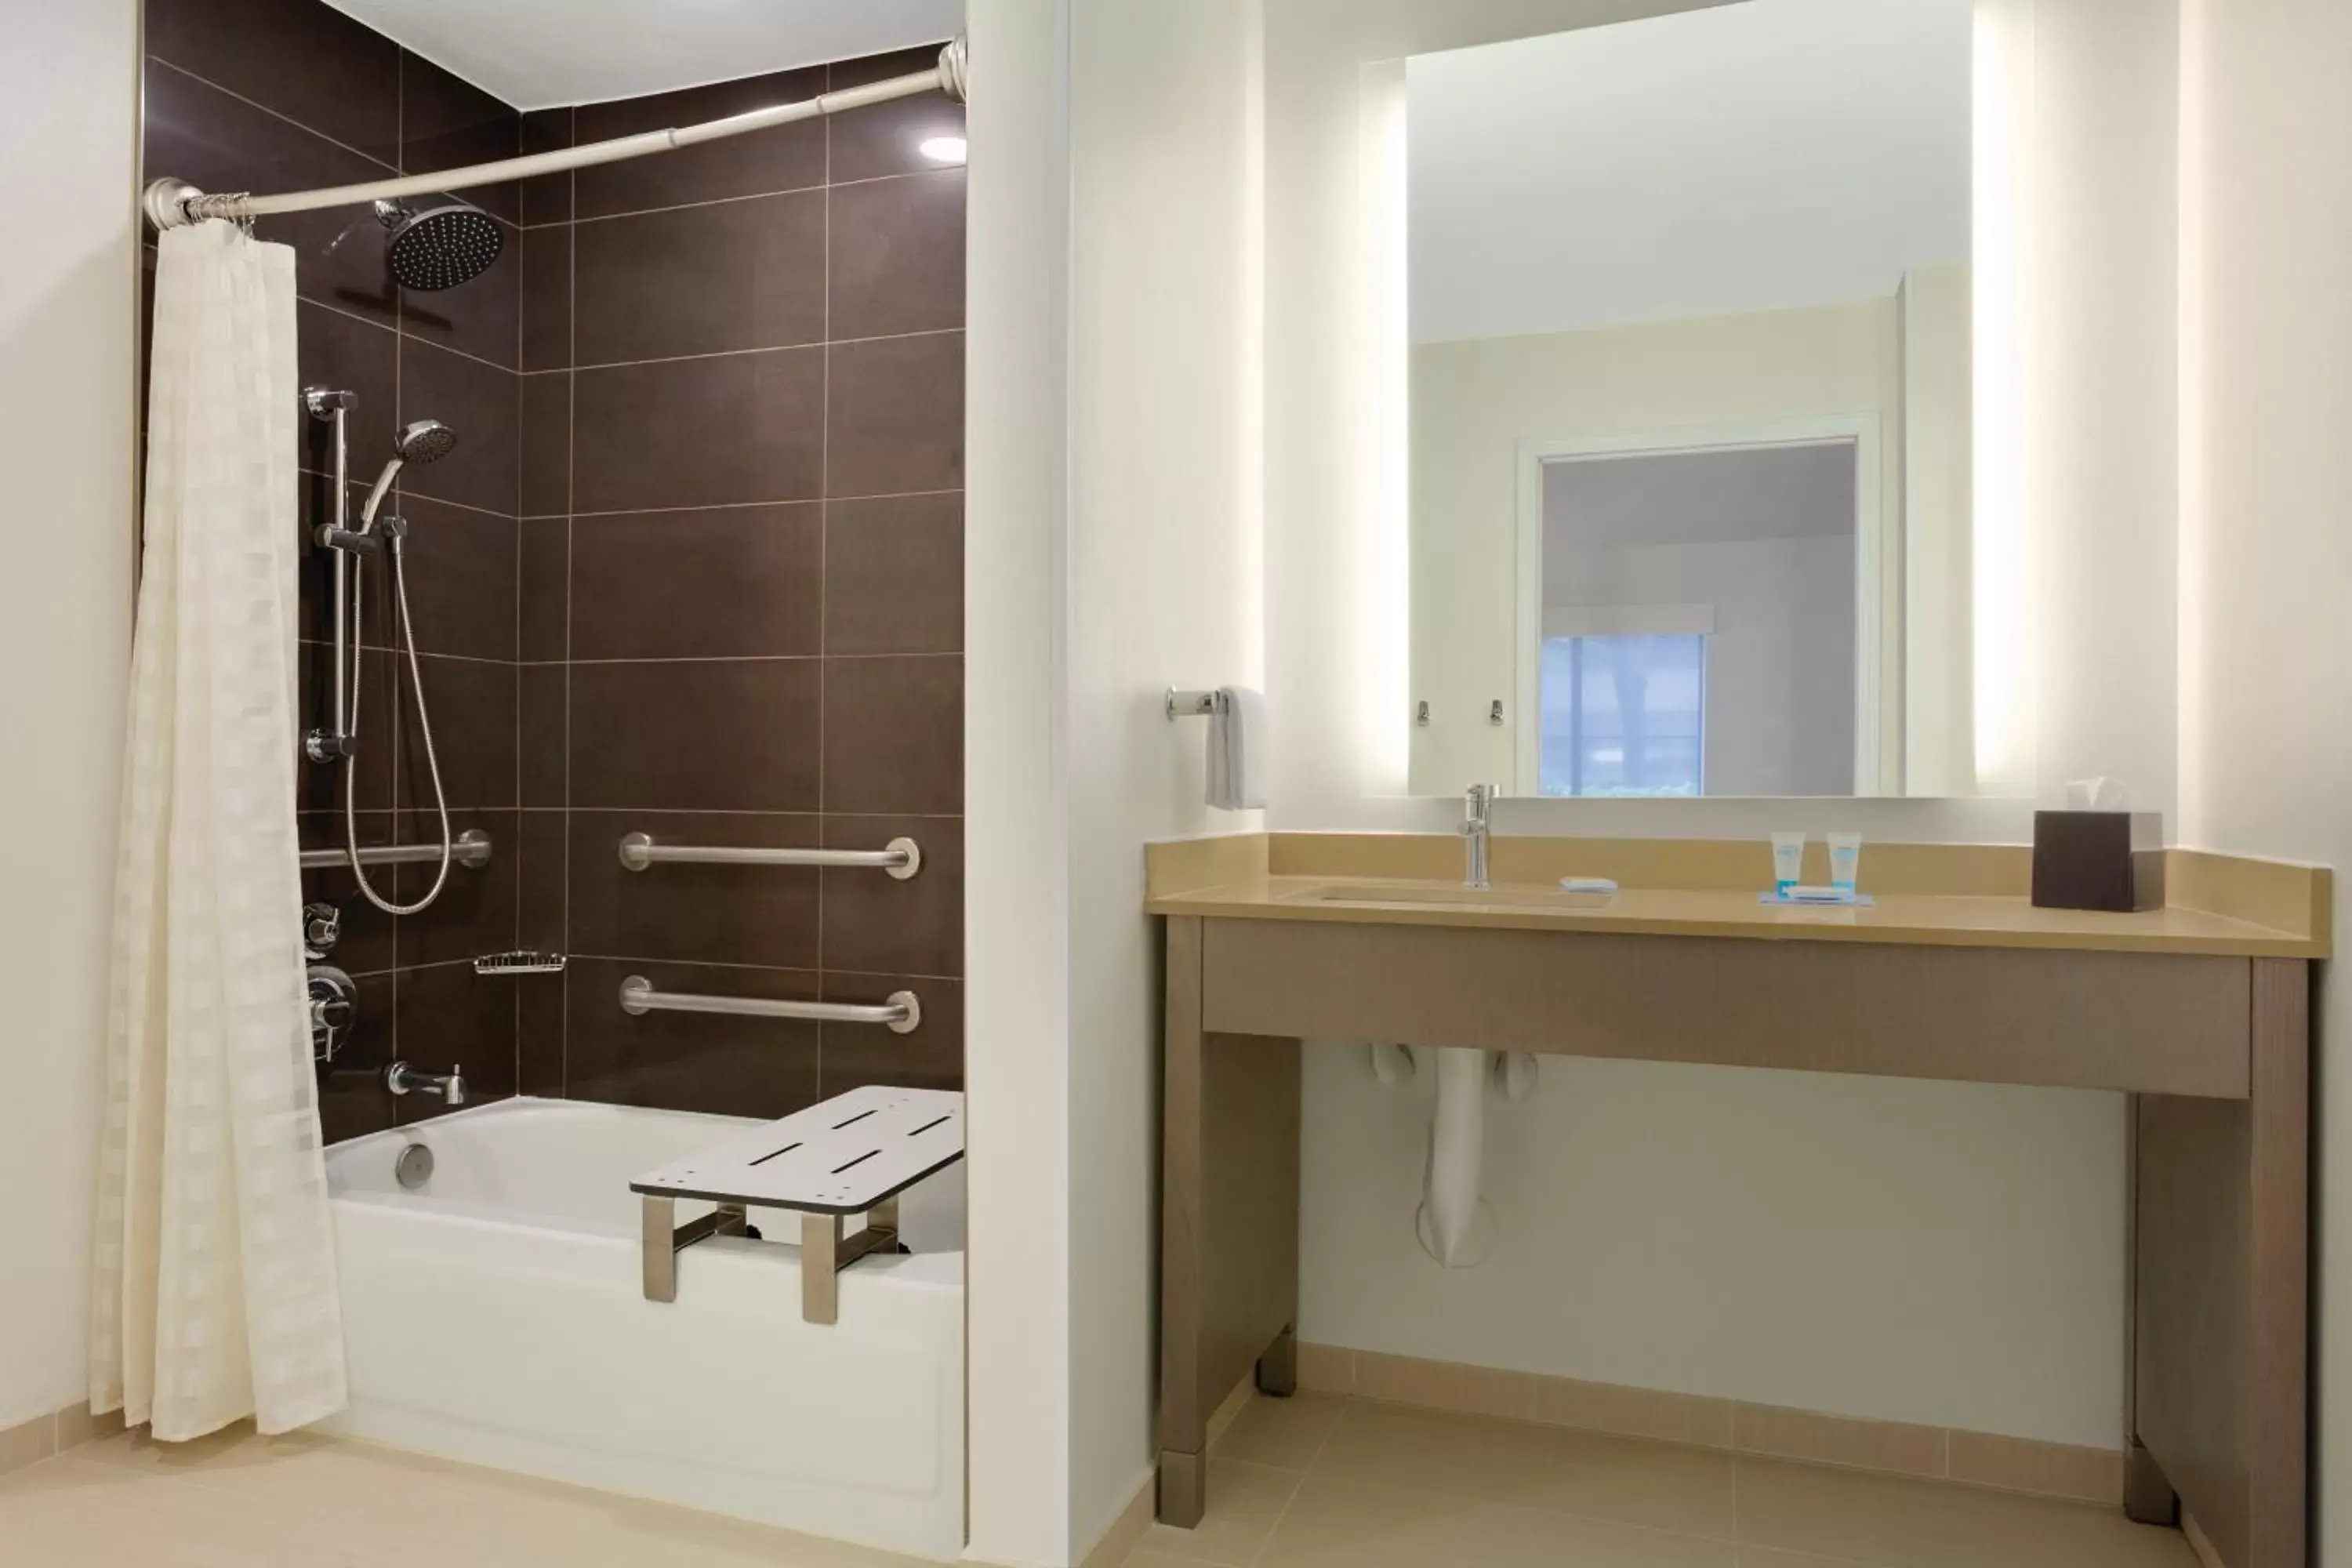 Facility for disabled guests, Bathroom in Hyatt House San Diego Sorrento Mesa